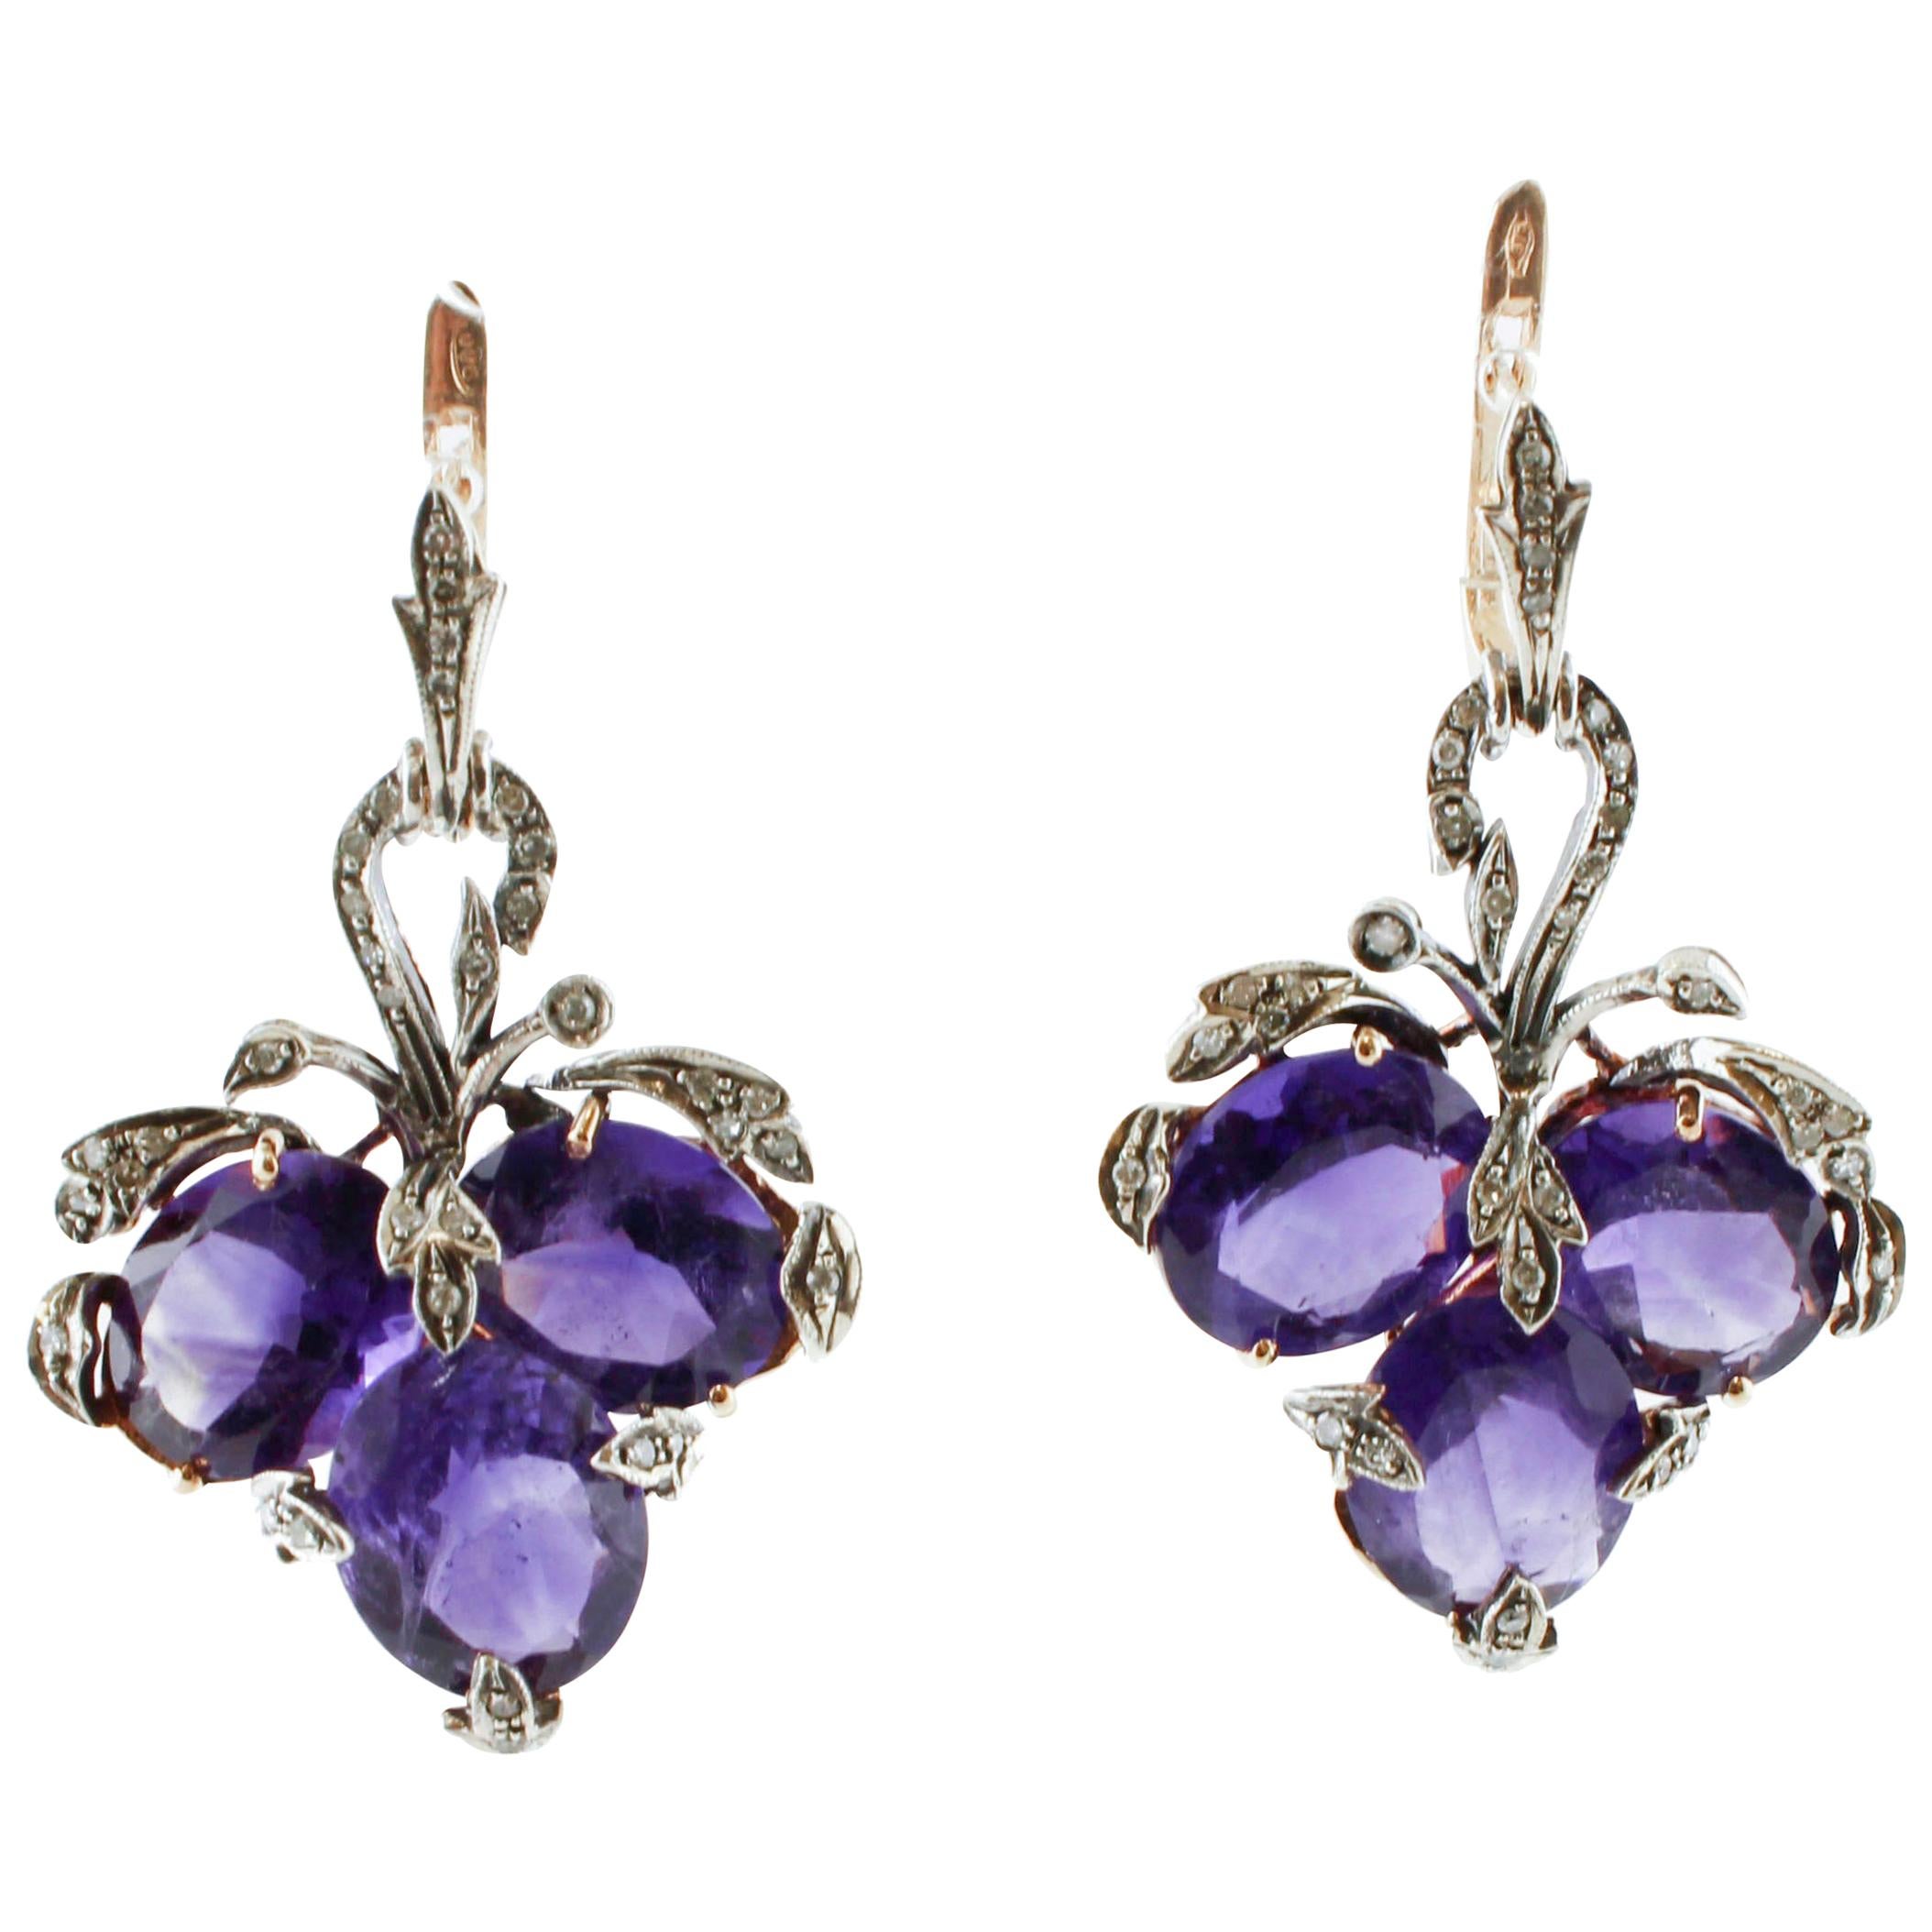 Little Diamonds, Amethysts, Rose Gold and Silver Level Back/Dangle Earrings